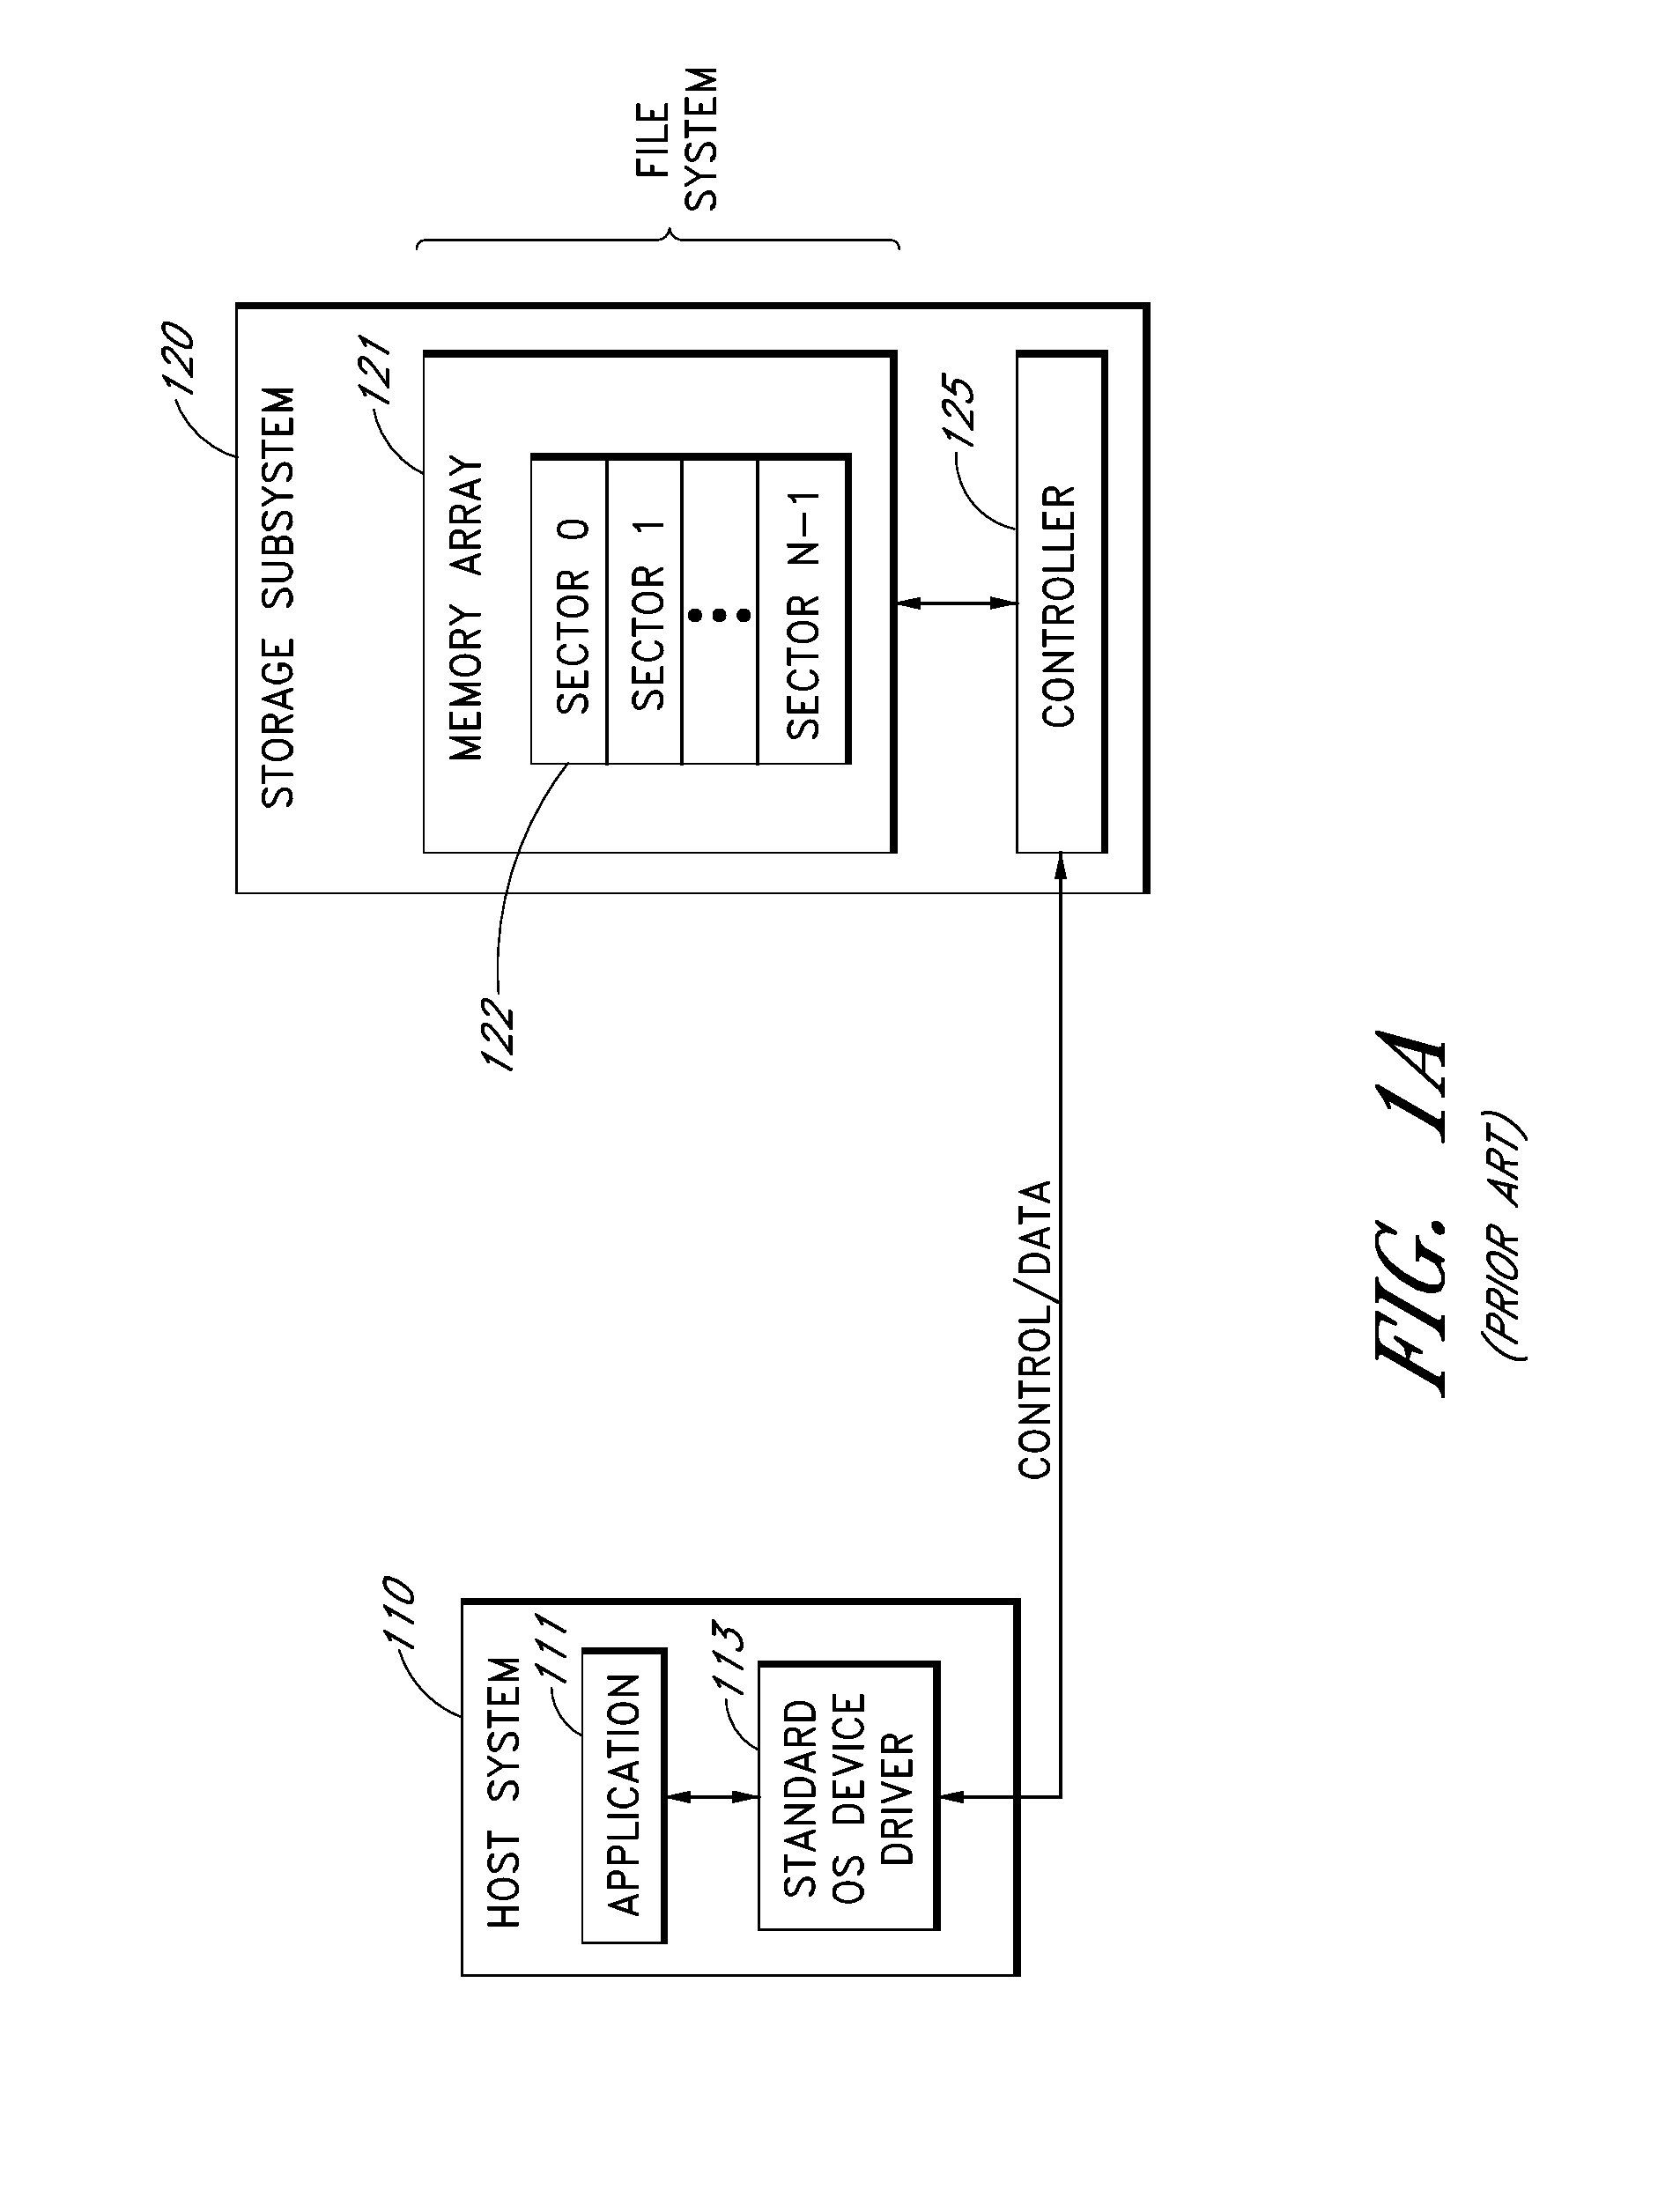 Command portal for securely communicating and executing non-standard storage subsystem commands